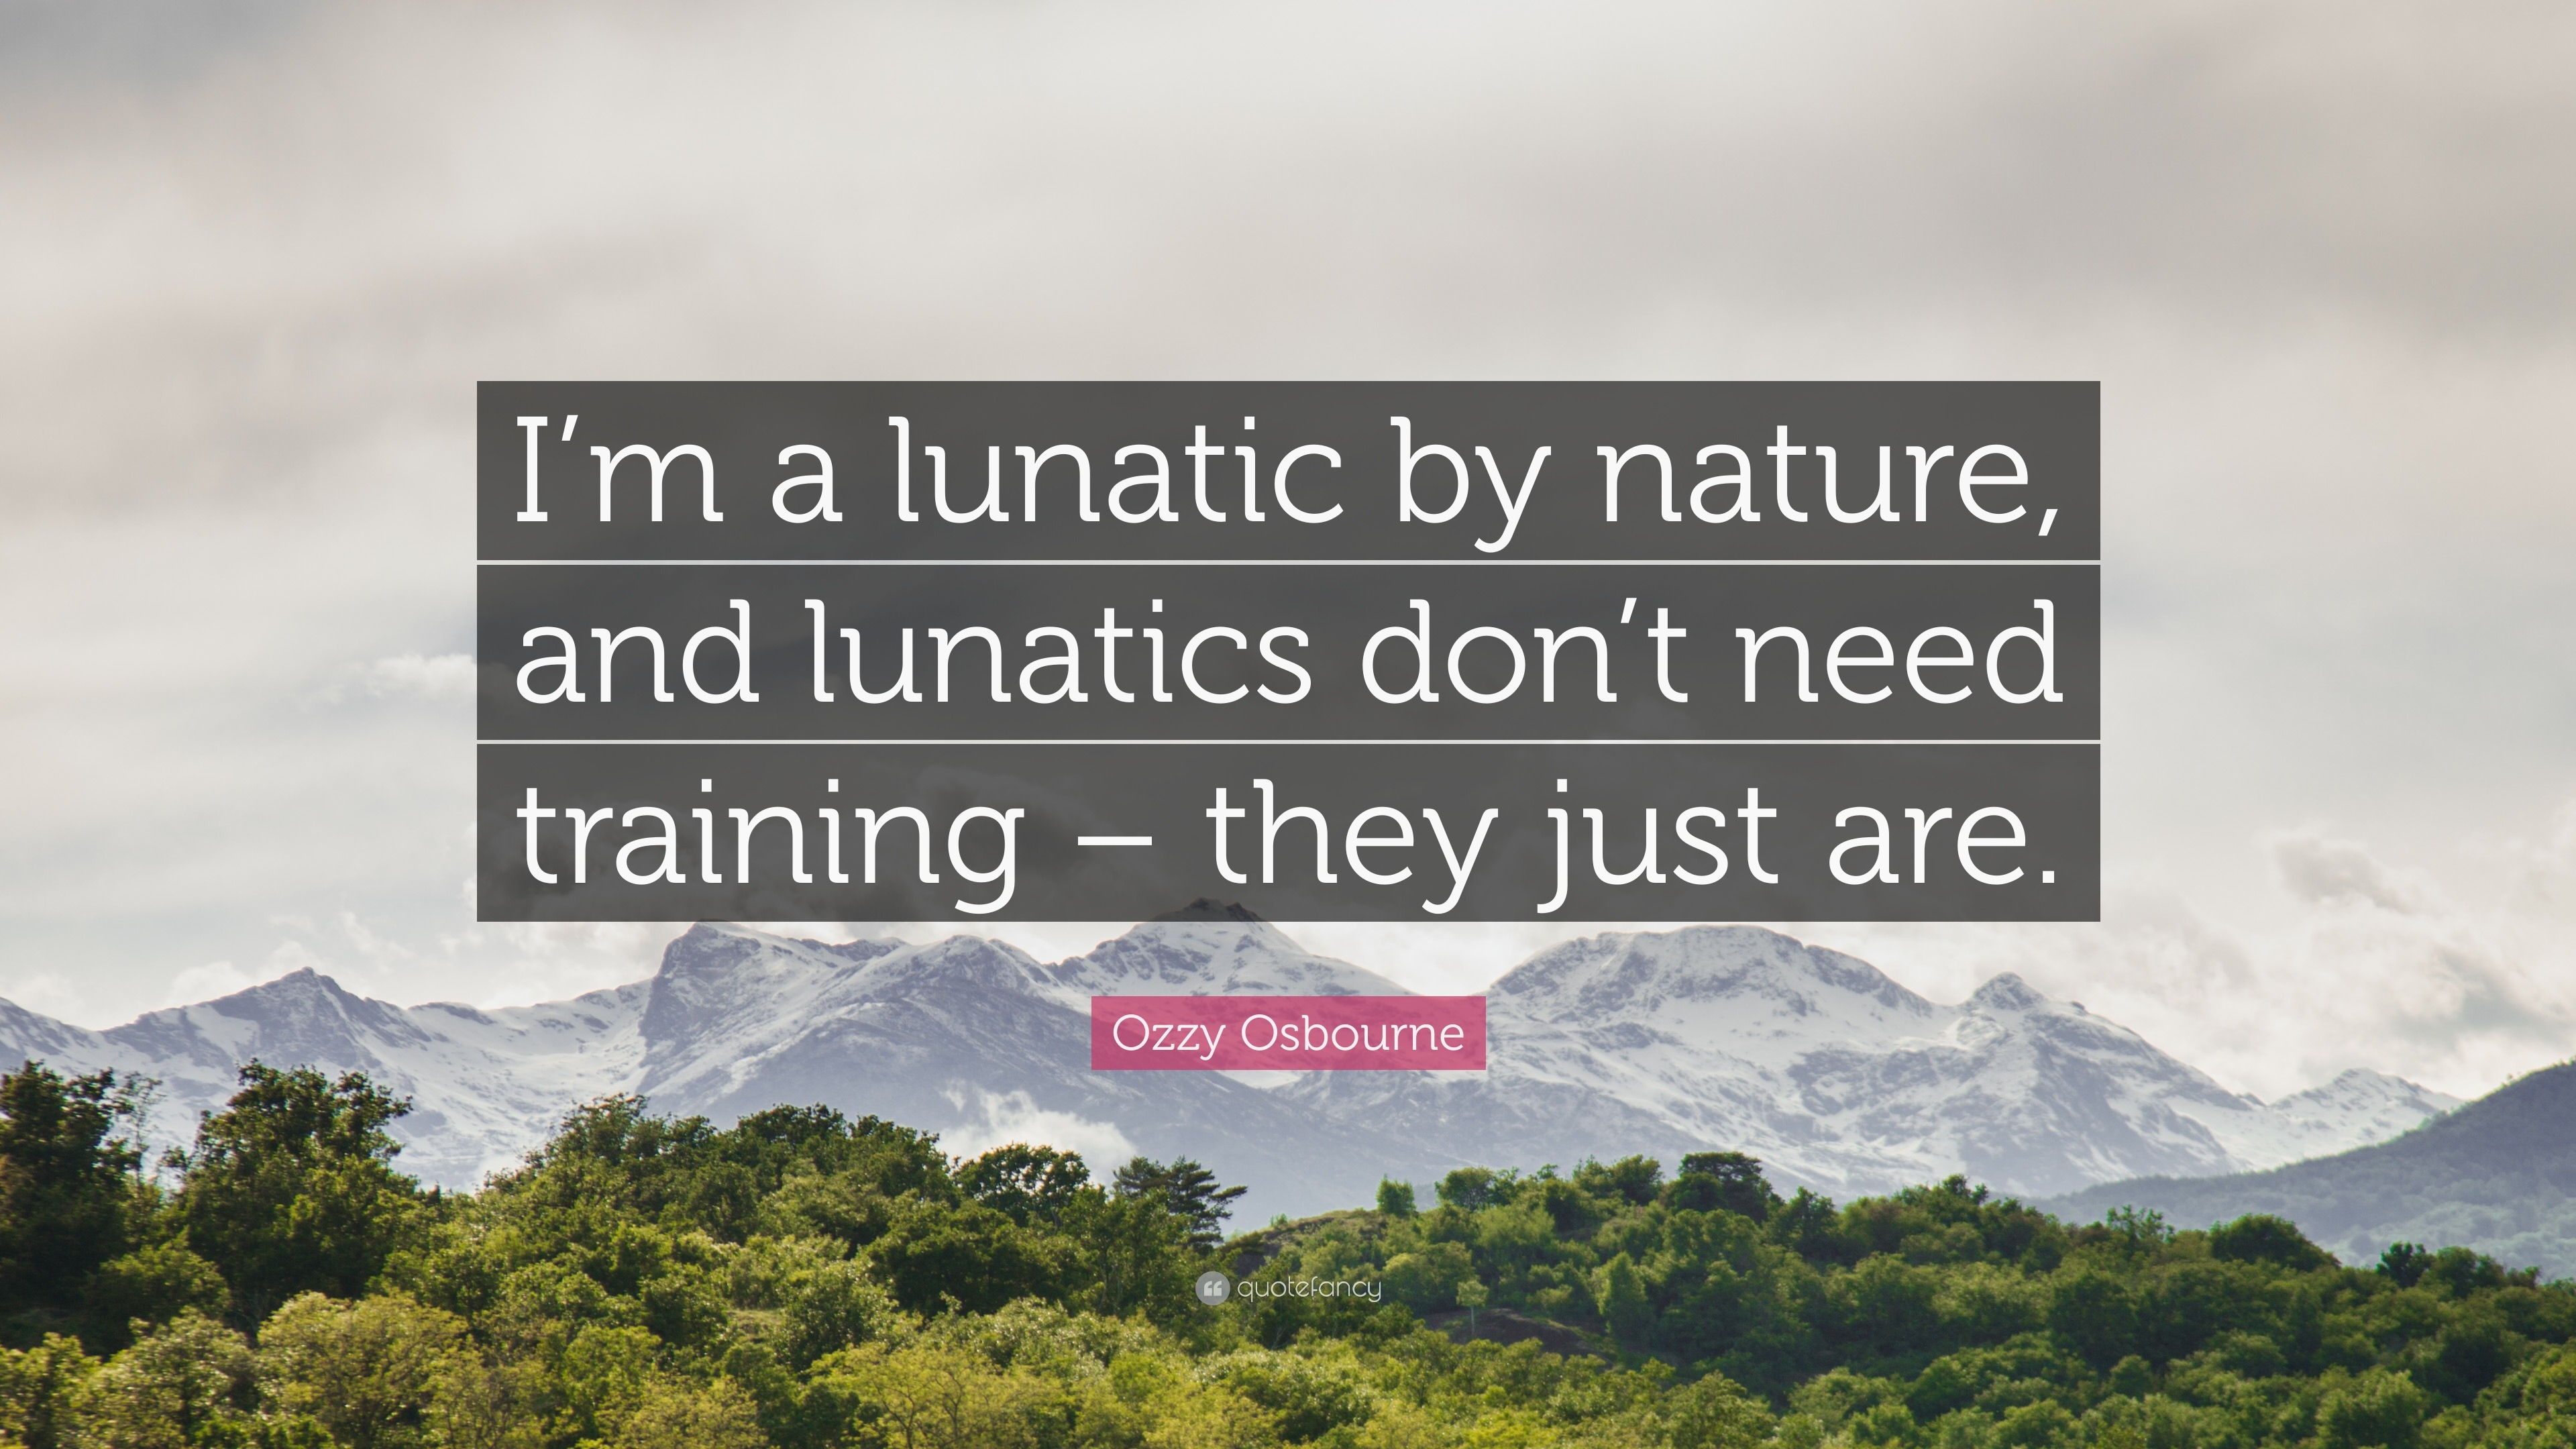 Ozzy Osbourne Quote: “I'm a by nature, and lunatics don't need training – they